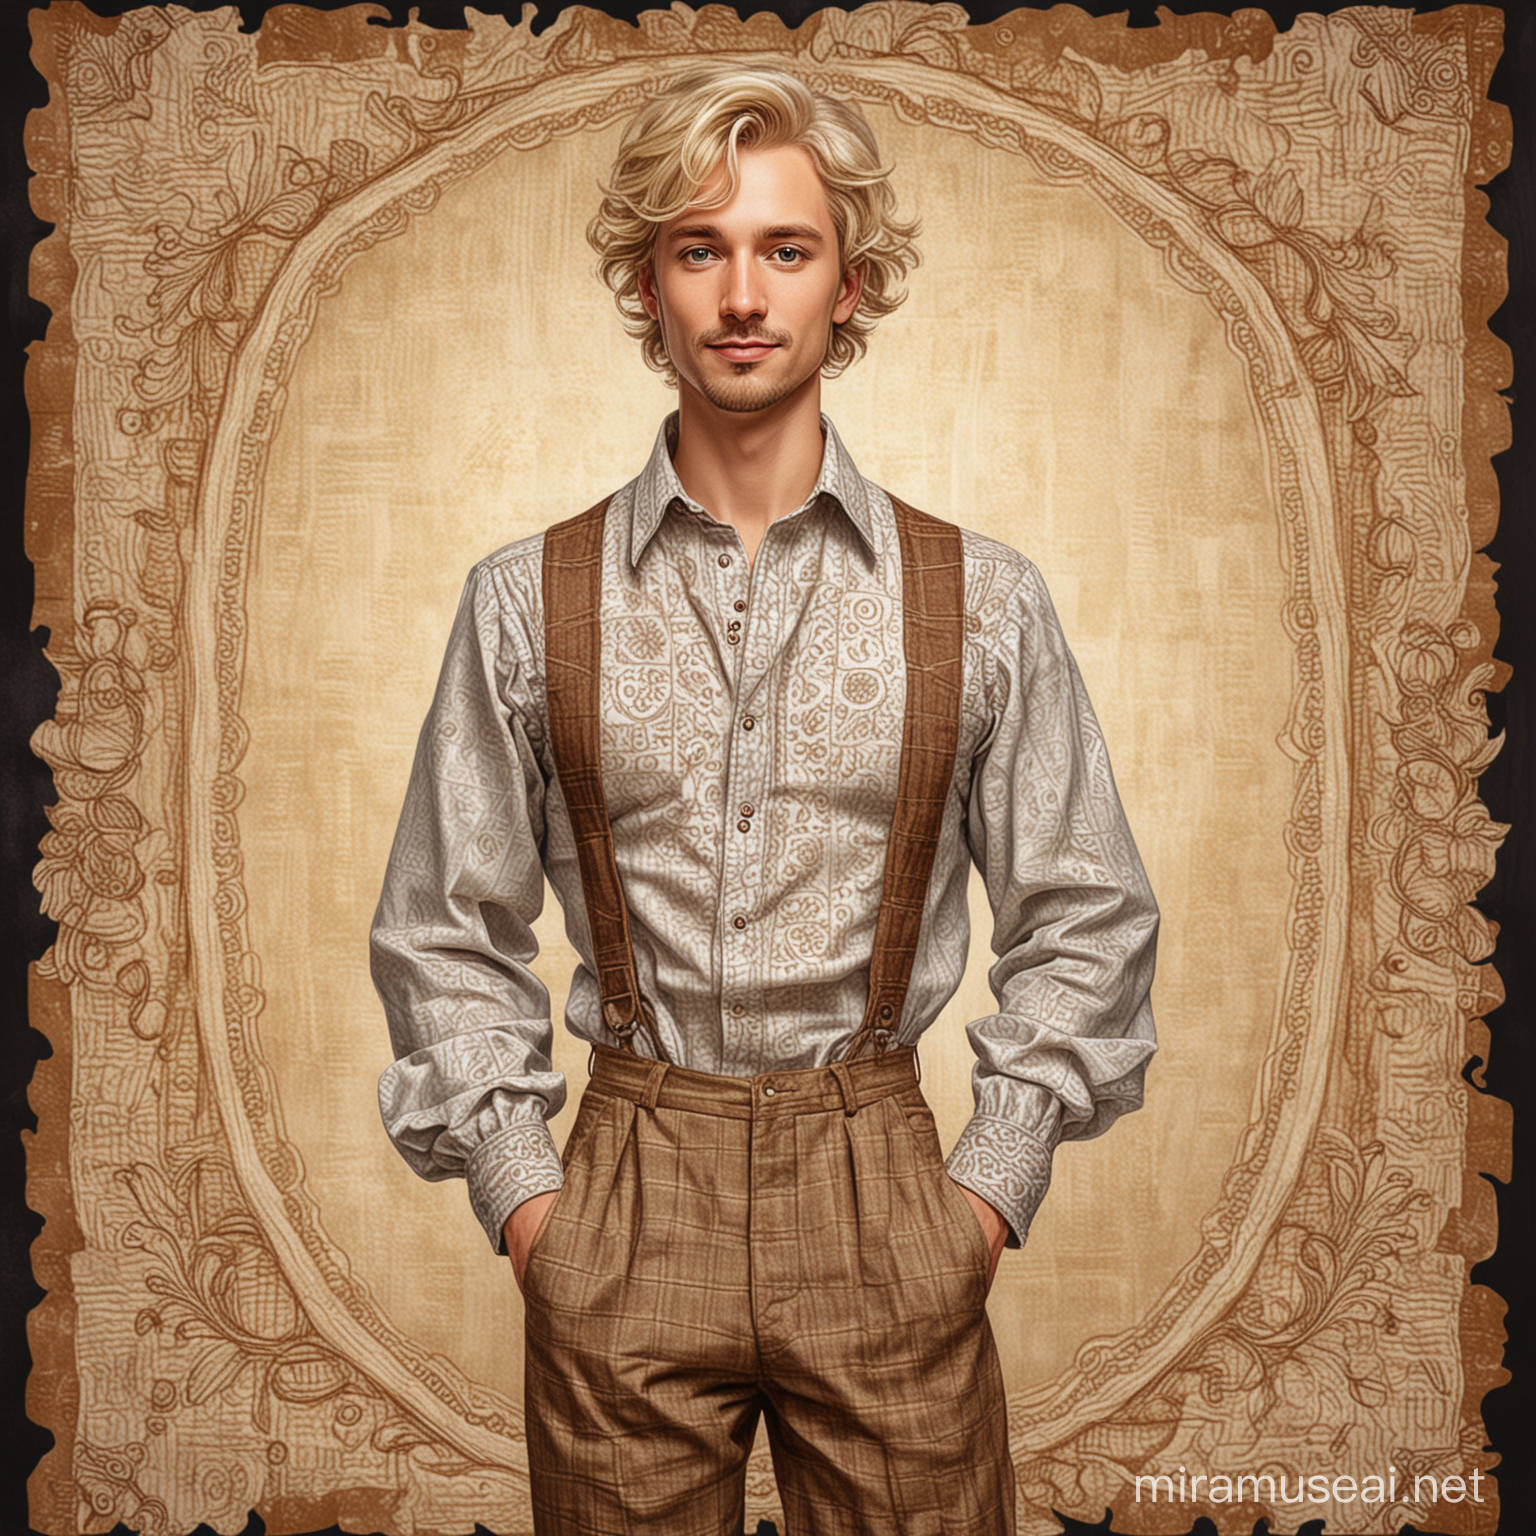 Very Cute 35 Years Old Blond Man, Stubble, Rare Beauty, Full Body Caricature, Ruffled Clothes, Background with Beautiful Patterns, Fantasy Art, Full Body, Fine Lines, Texture, Ink Drawing, Acrylic, Vintage, Patchwork, Detailed Set Drawing Storybook, Surreal, Tyndall 9 Effect, Dynamic Lighting, Sfumato, Perfect Ratio, High Detail, Full Body